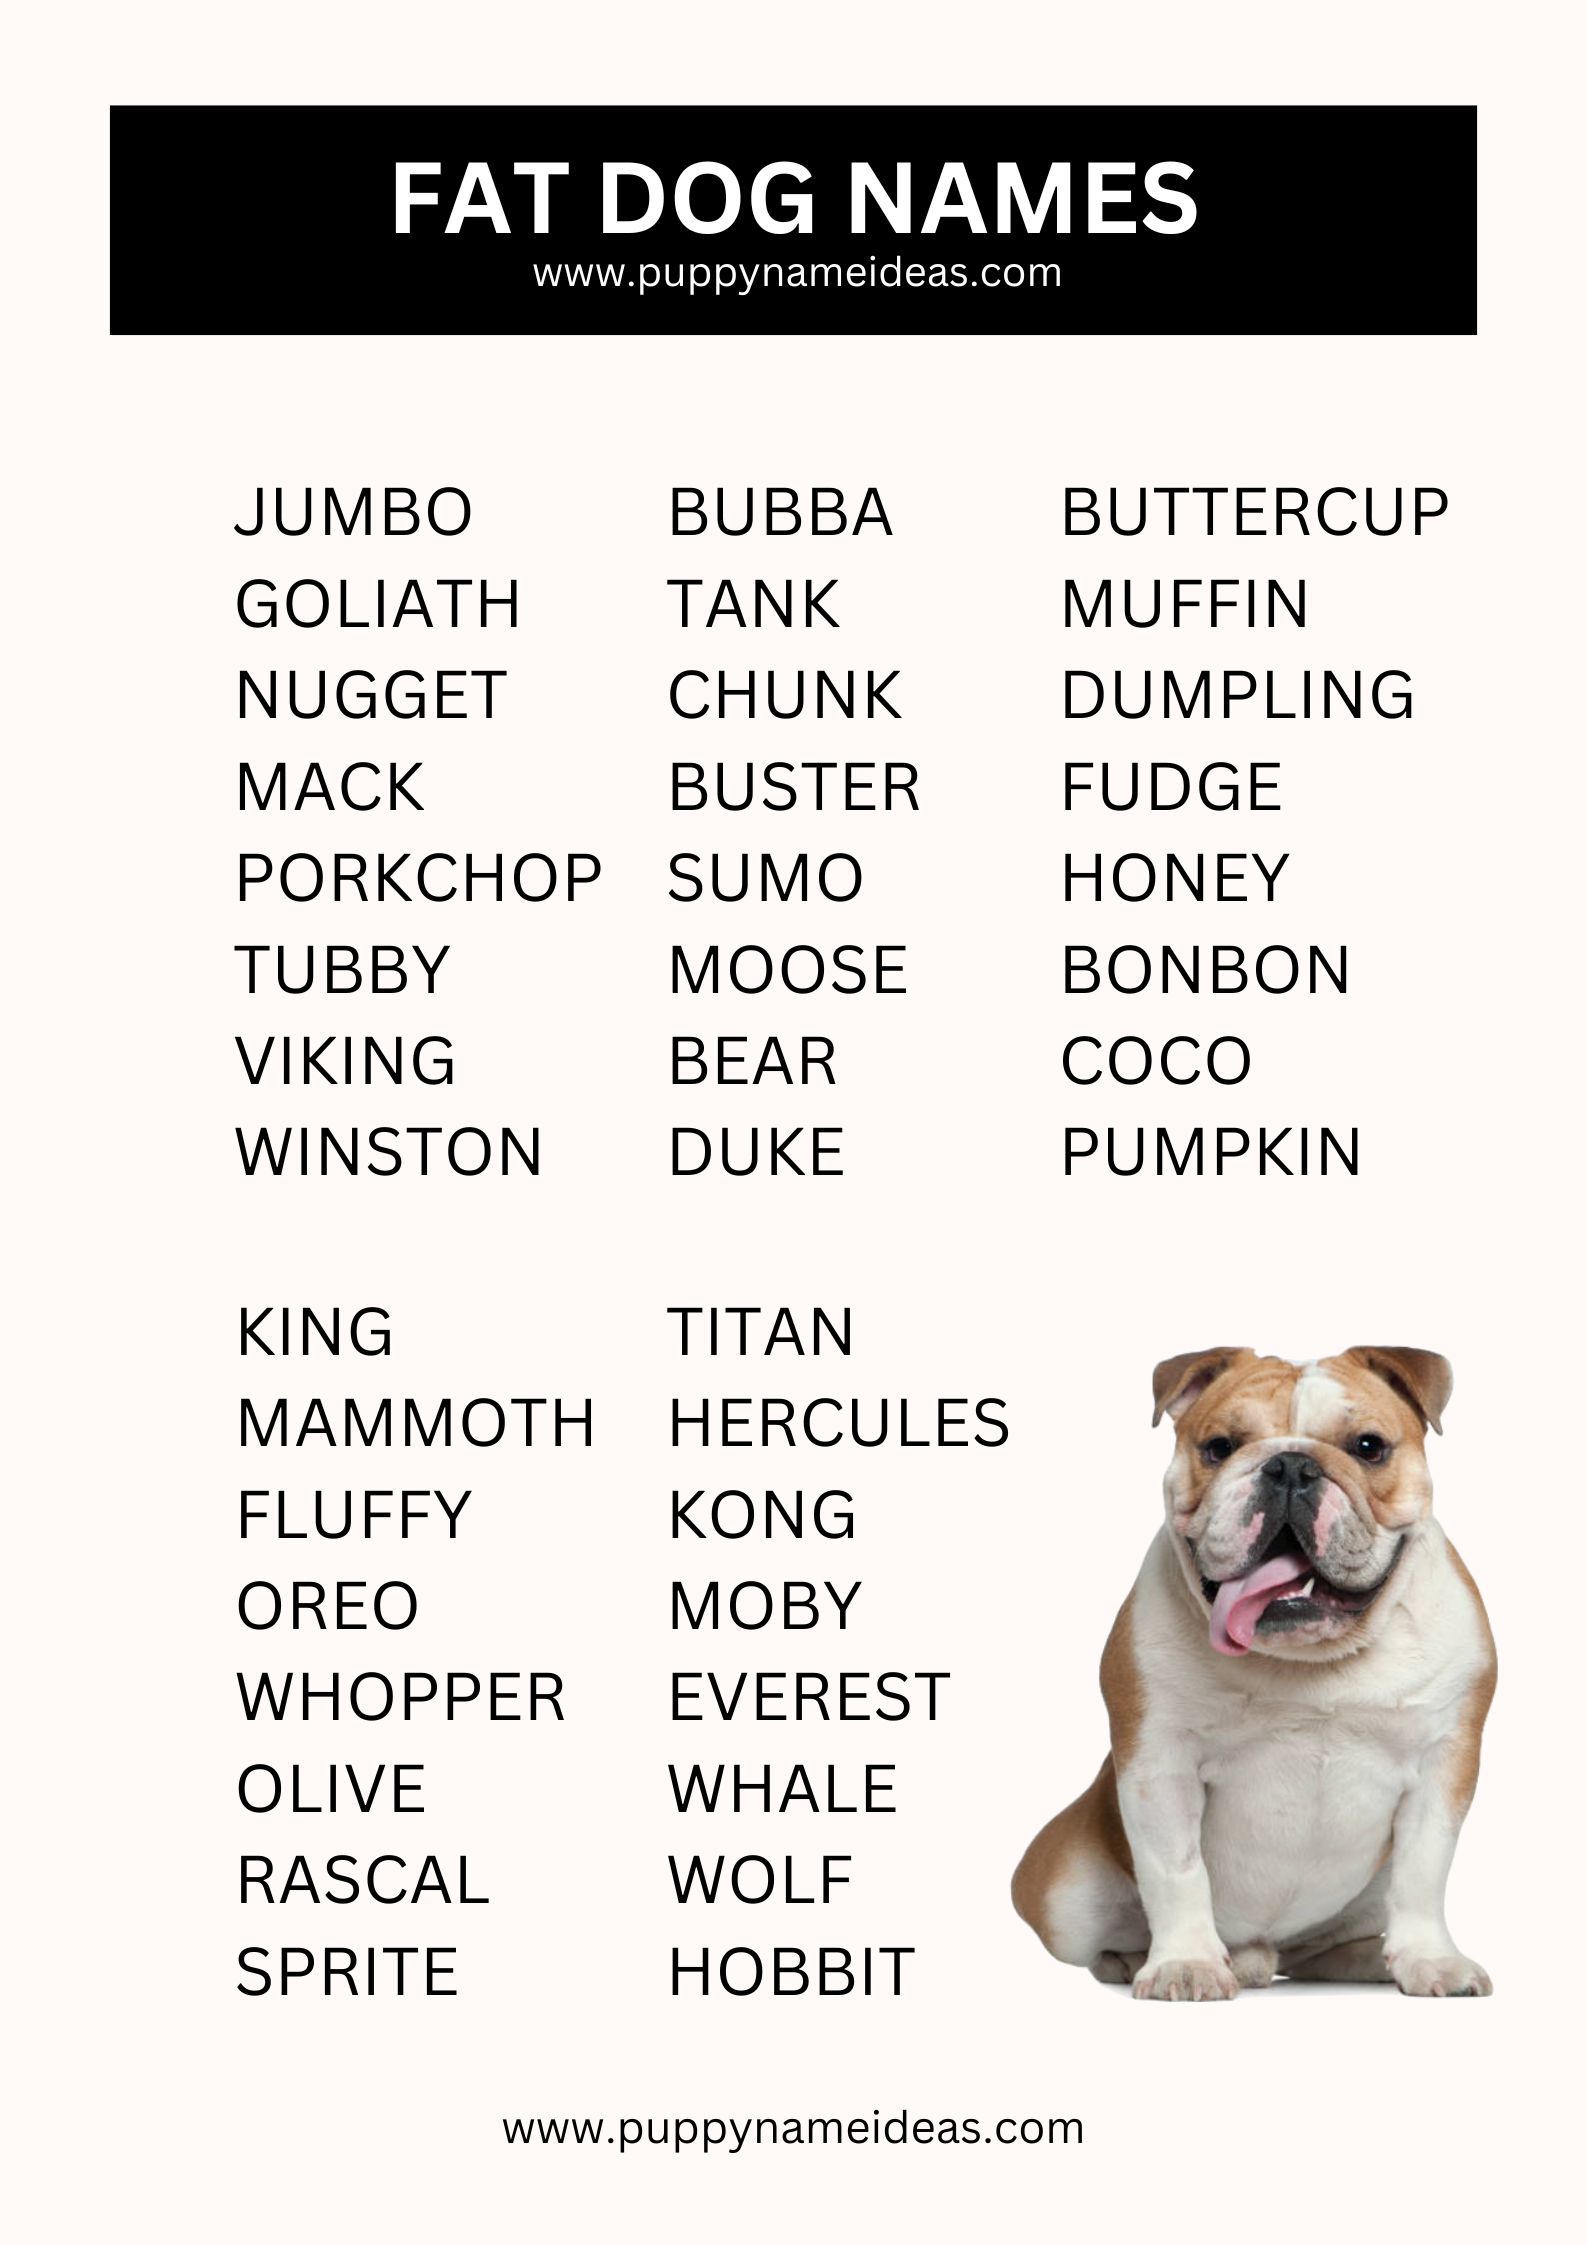 list of fat dog names